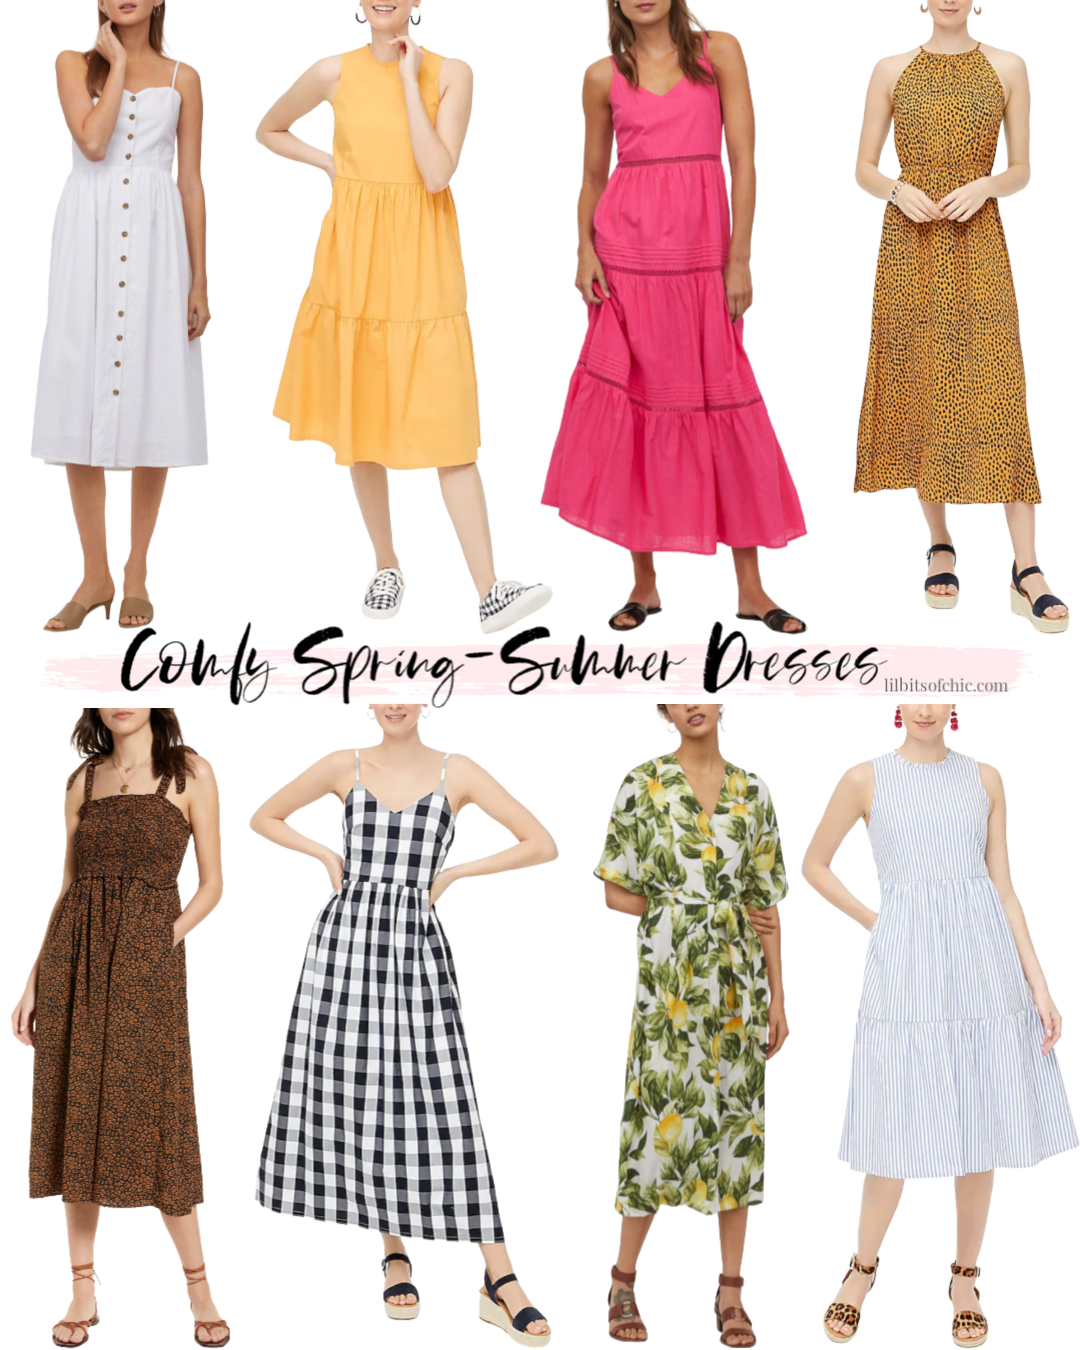 Comfy Spring Dresses you can wear at home, affordable summer midi dresses, colorful spring midi dresses